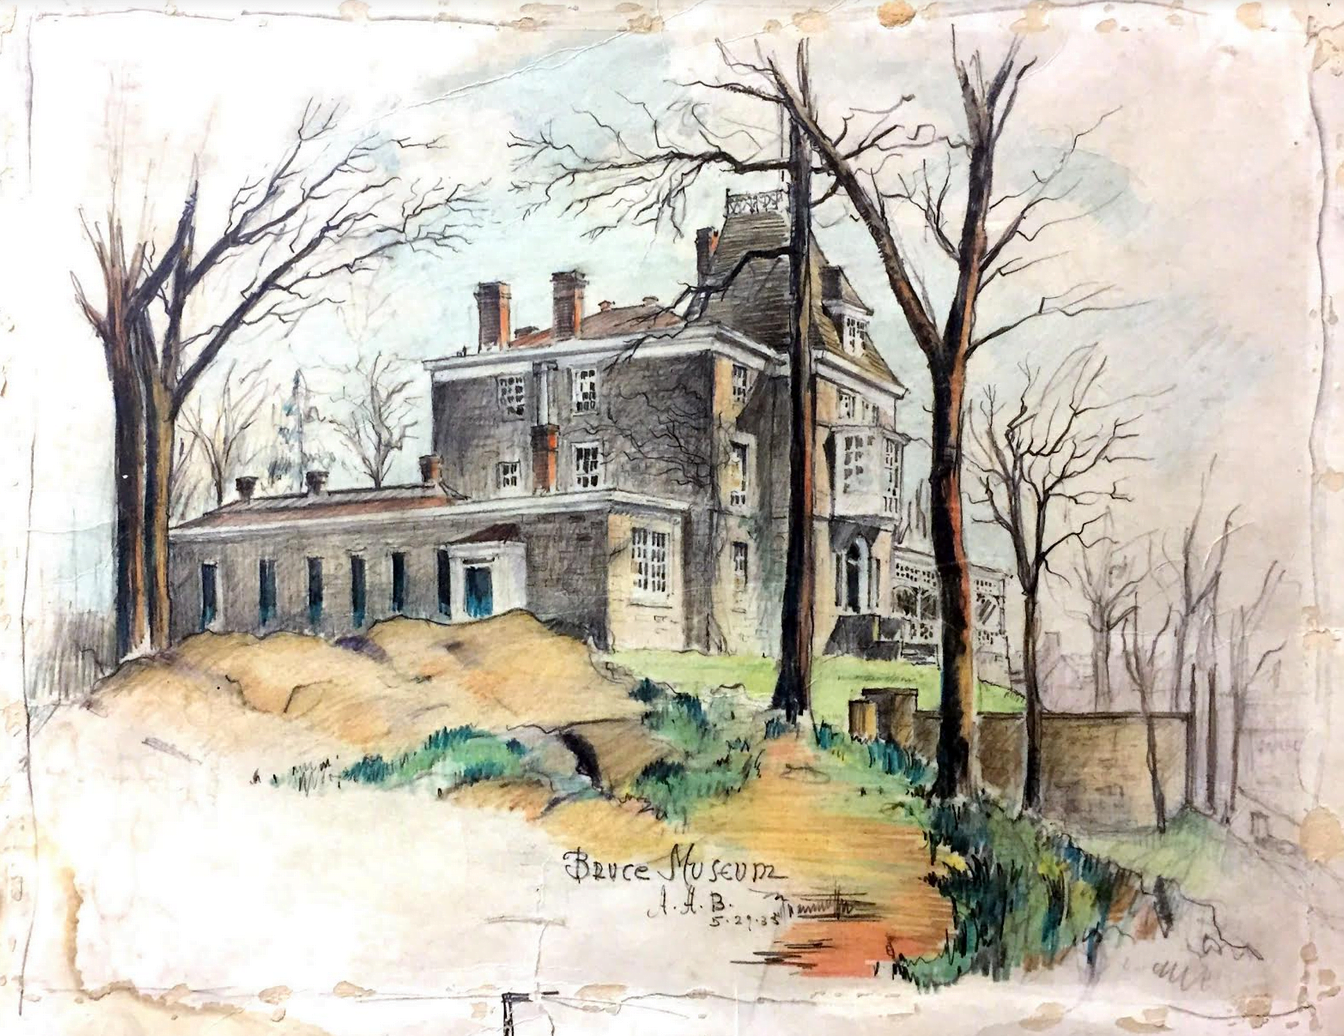 Colored pencil drawing of the Bruce Museum by architect Albert A. Blodgett, 1935. Bruce Museum Collection.